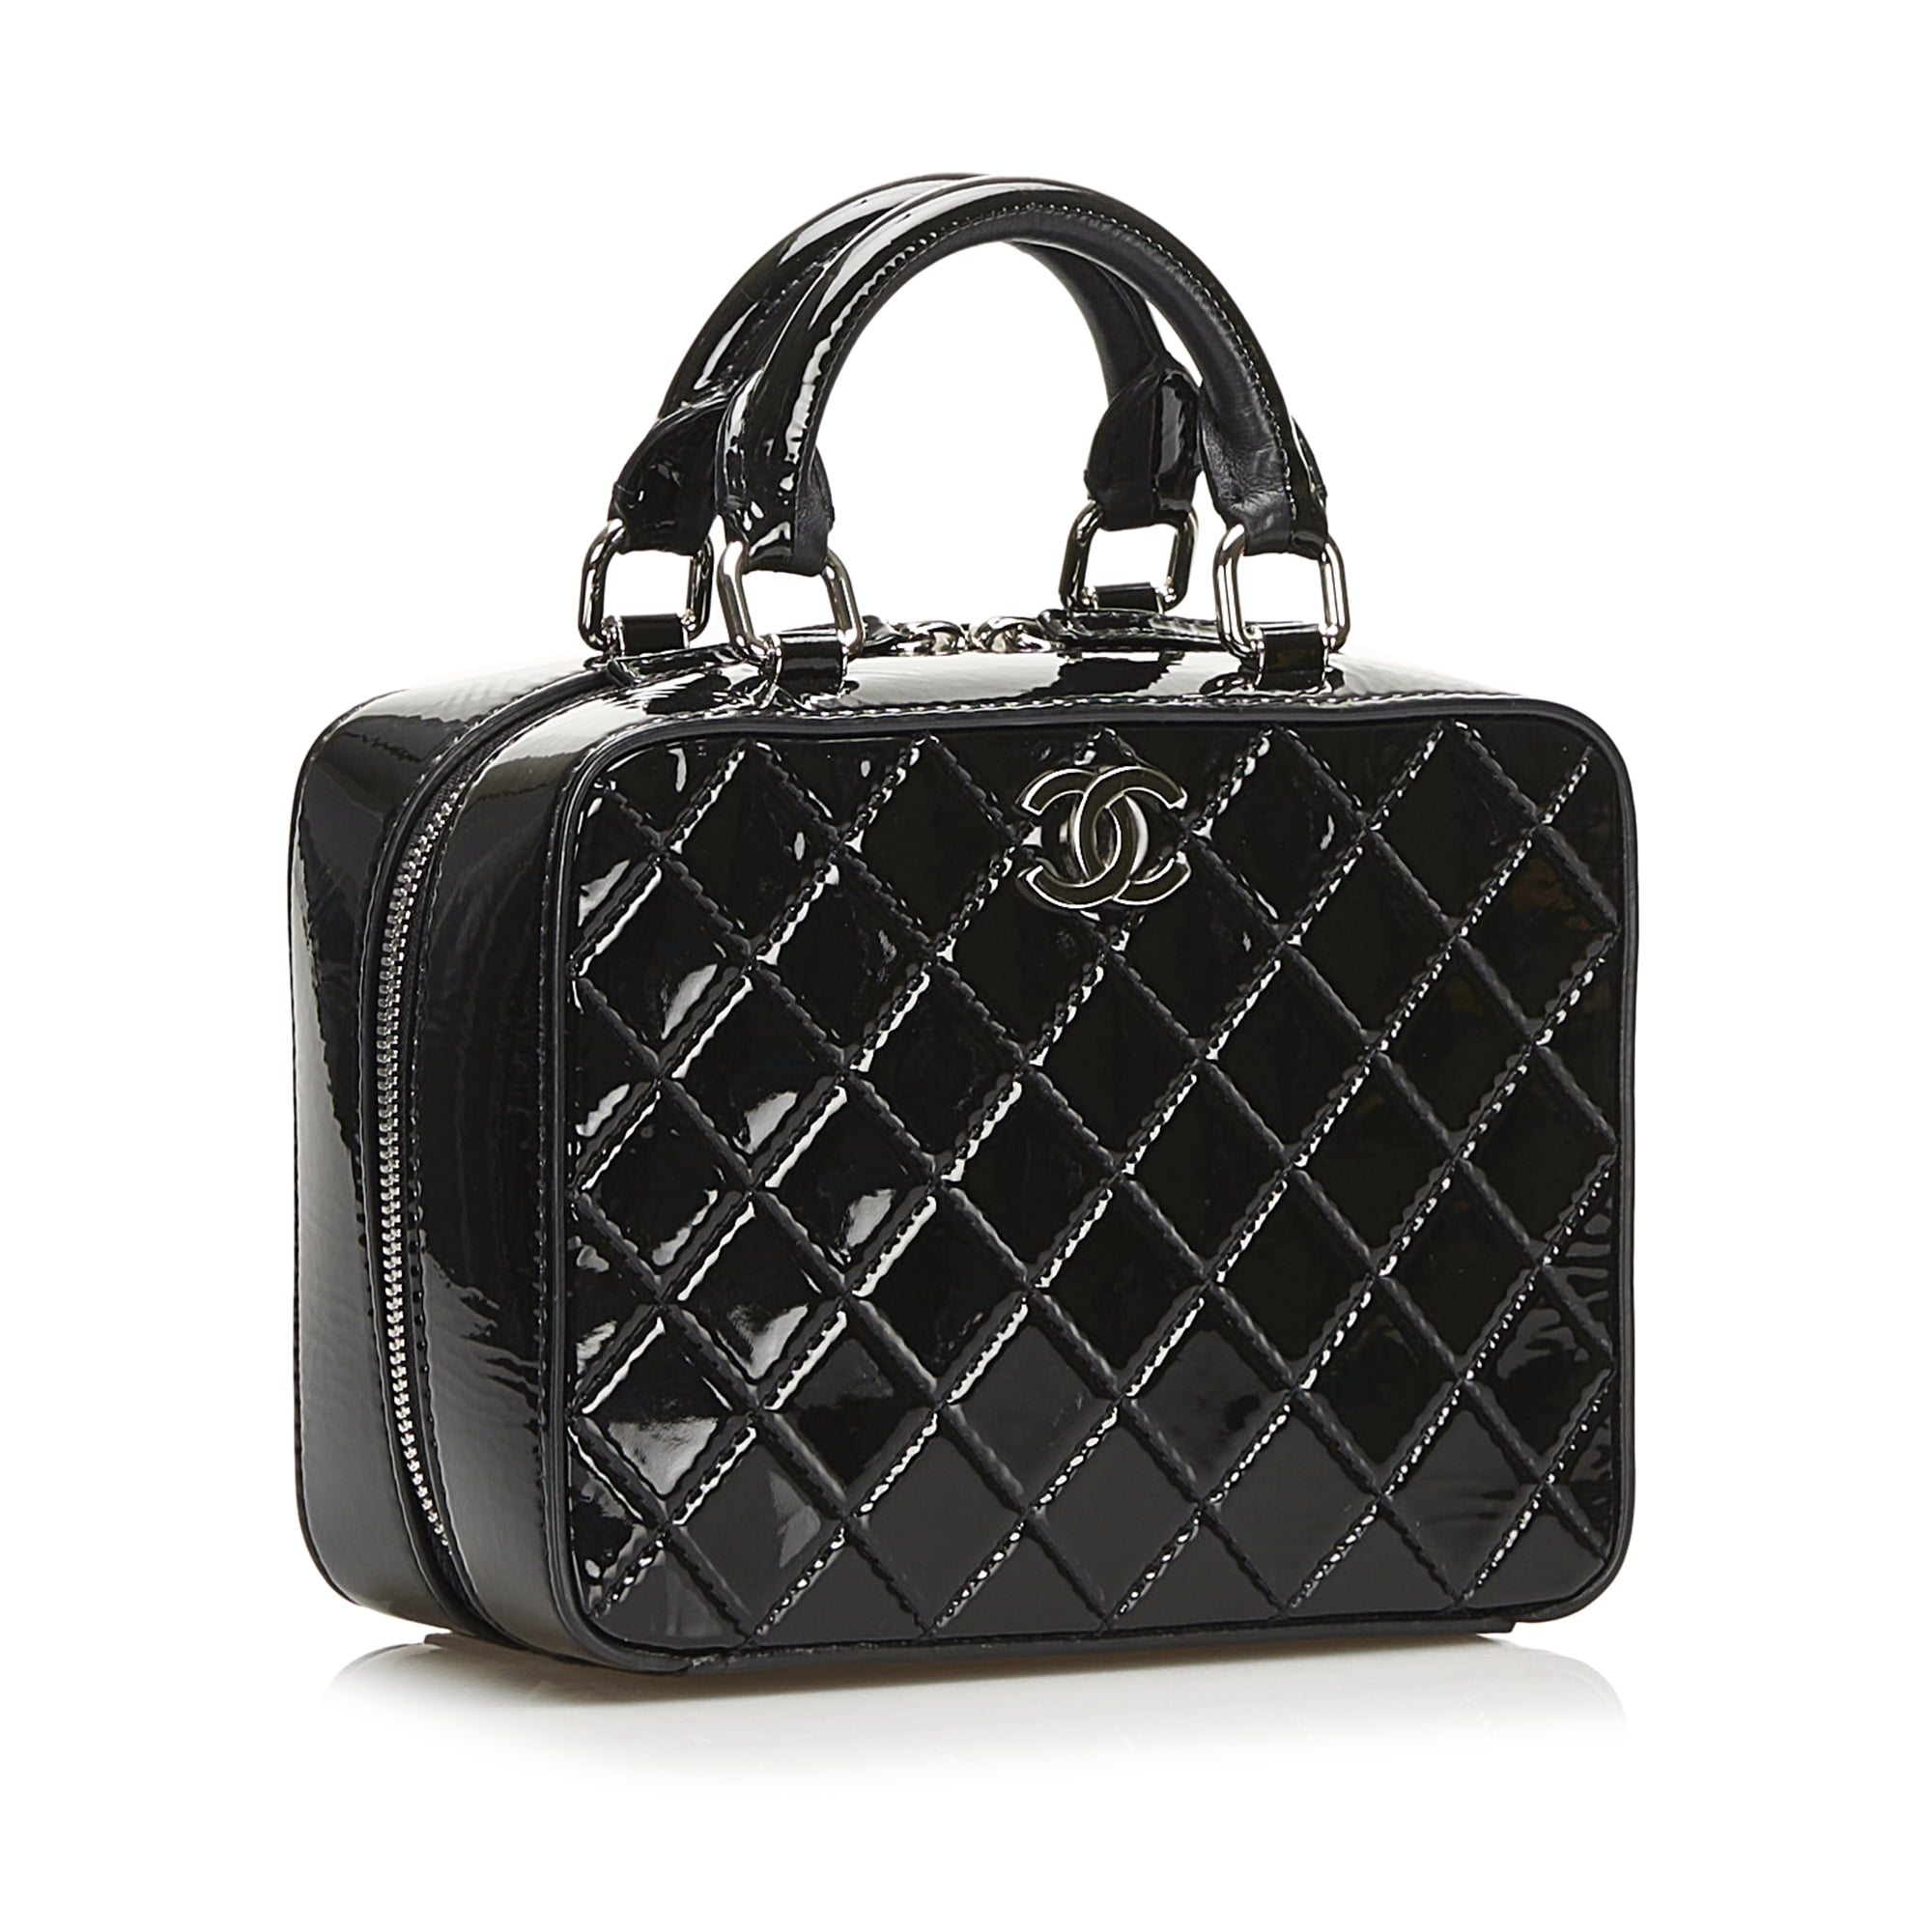 Pre-Owned Authenticated Chanel Vanity Case Satchel Patent Leather Black  Unisex (New with Defects)